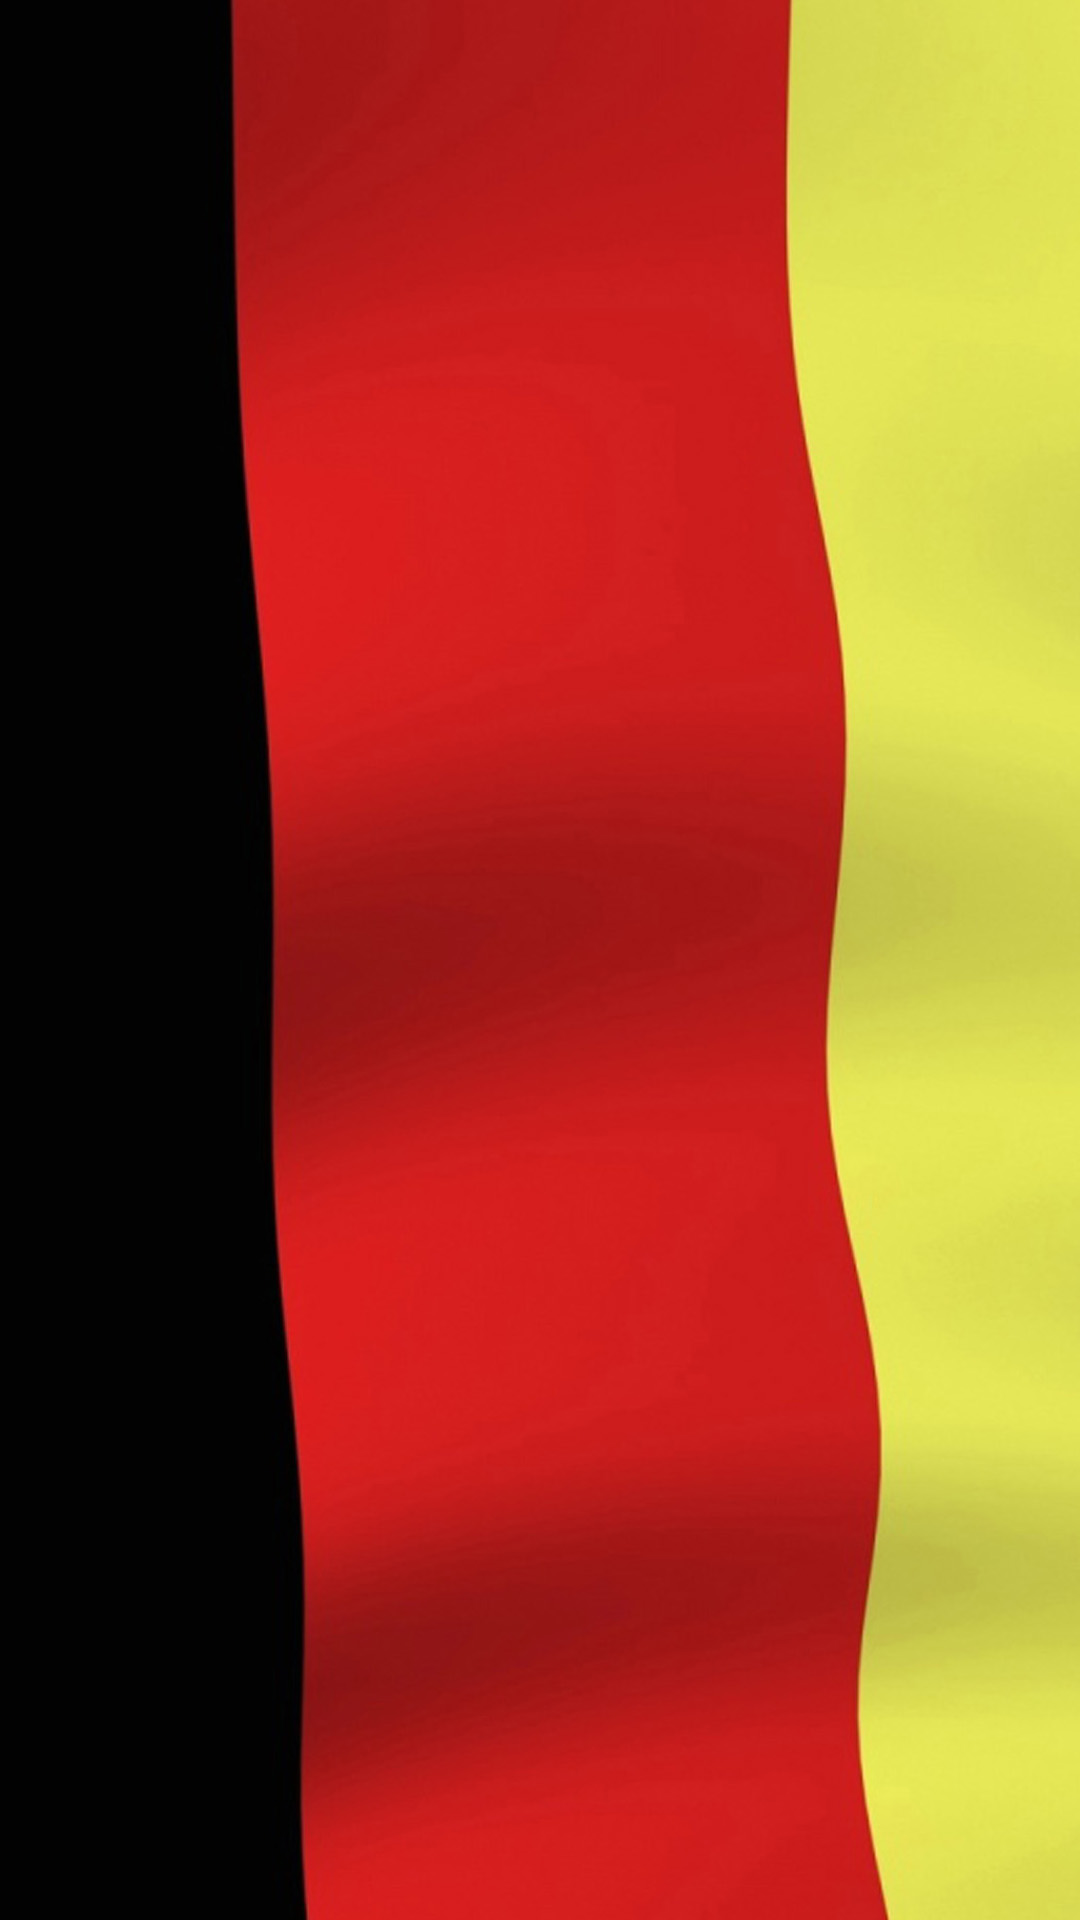 Germany Flag Htc One M8 Wallpaper